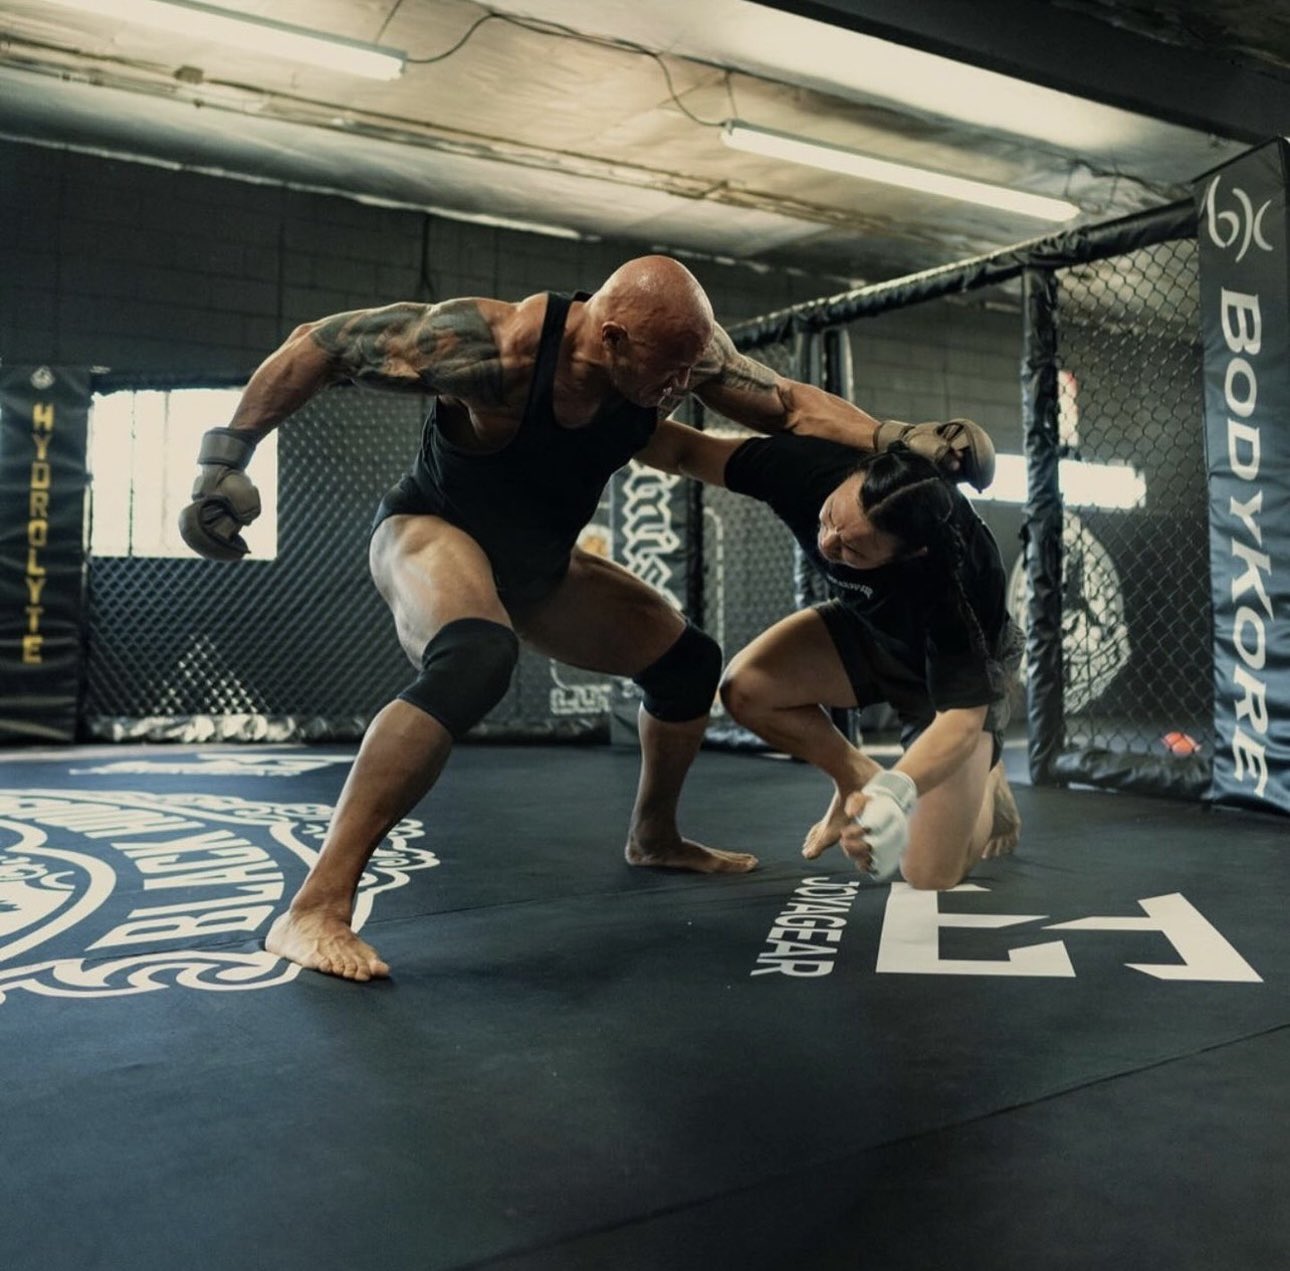 Dwayne Johnson on X: "Training camp - working hard to learn and absorb  everything I can. Thank you @BlackHouseMMA for allowing me the privilege of  training in your gym as I prepare